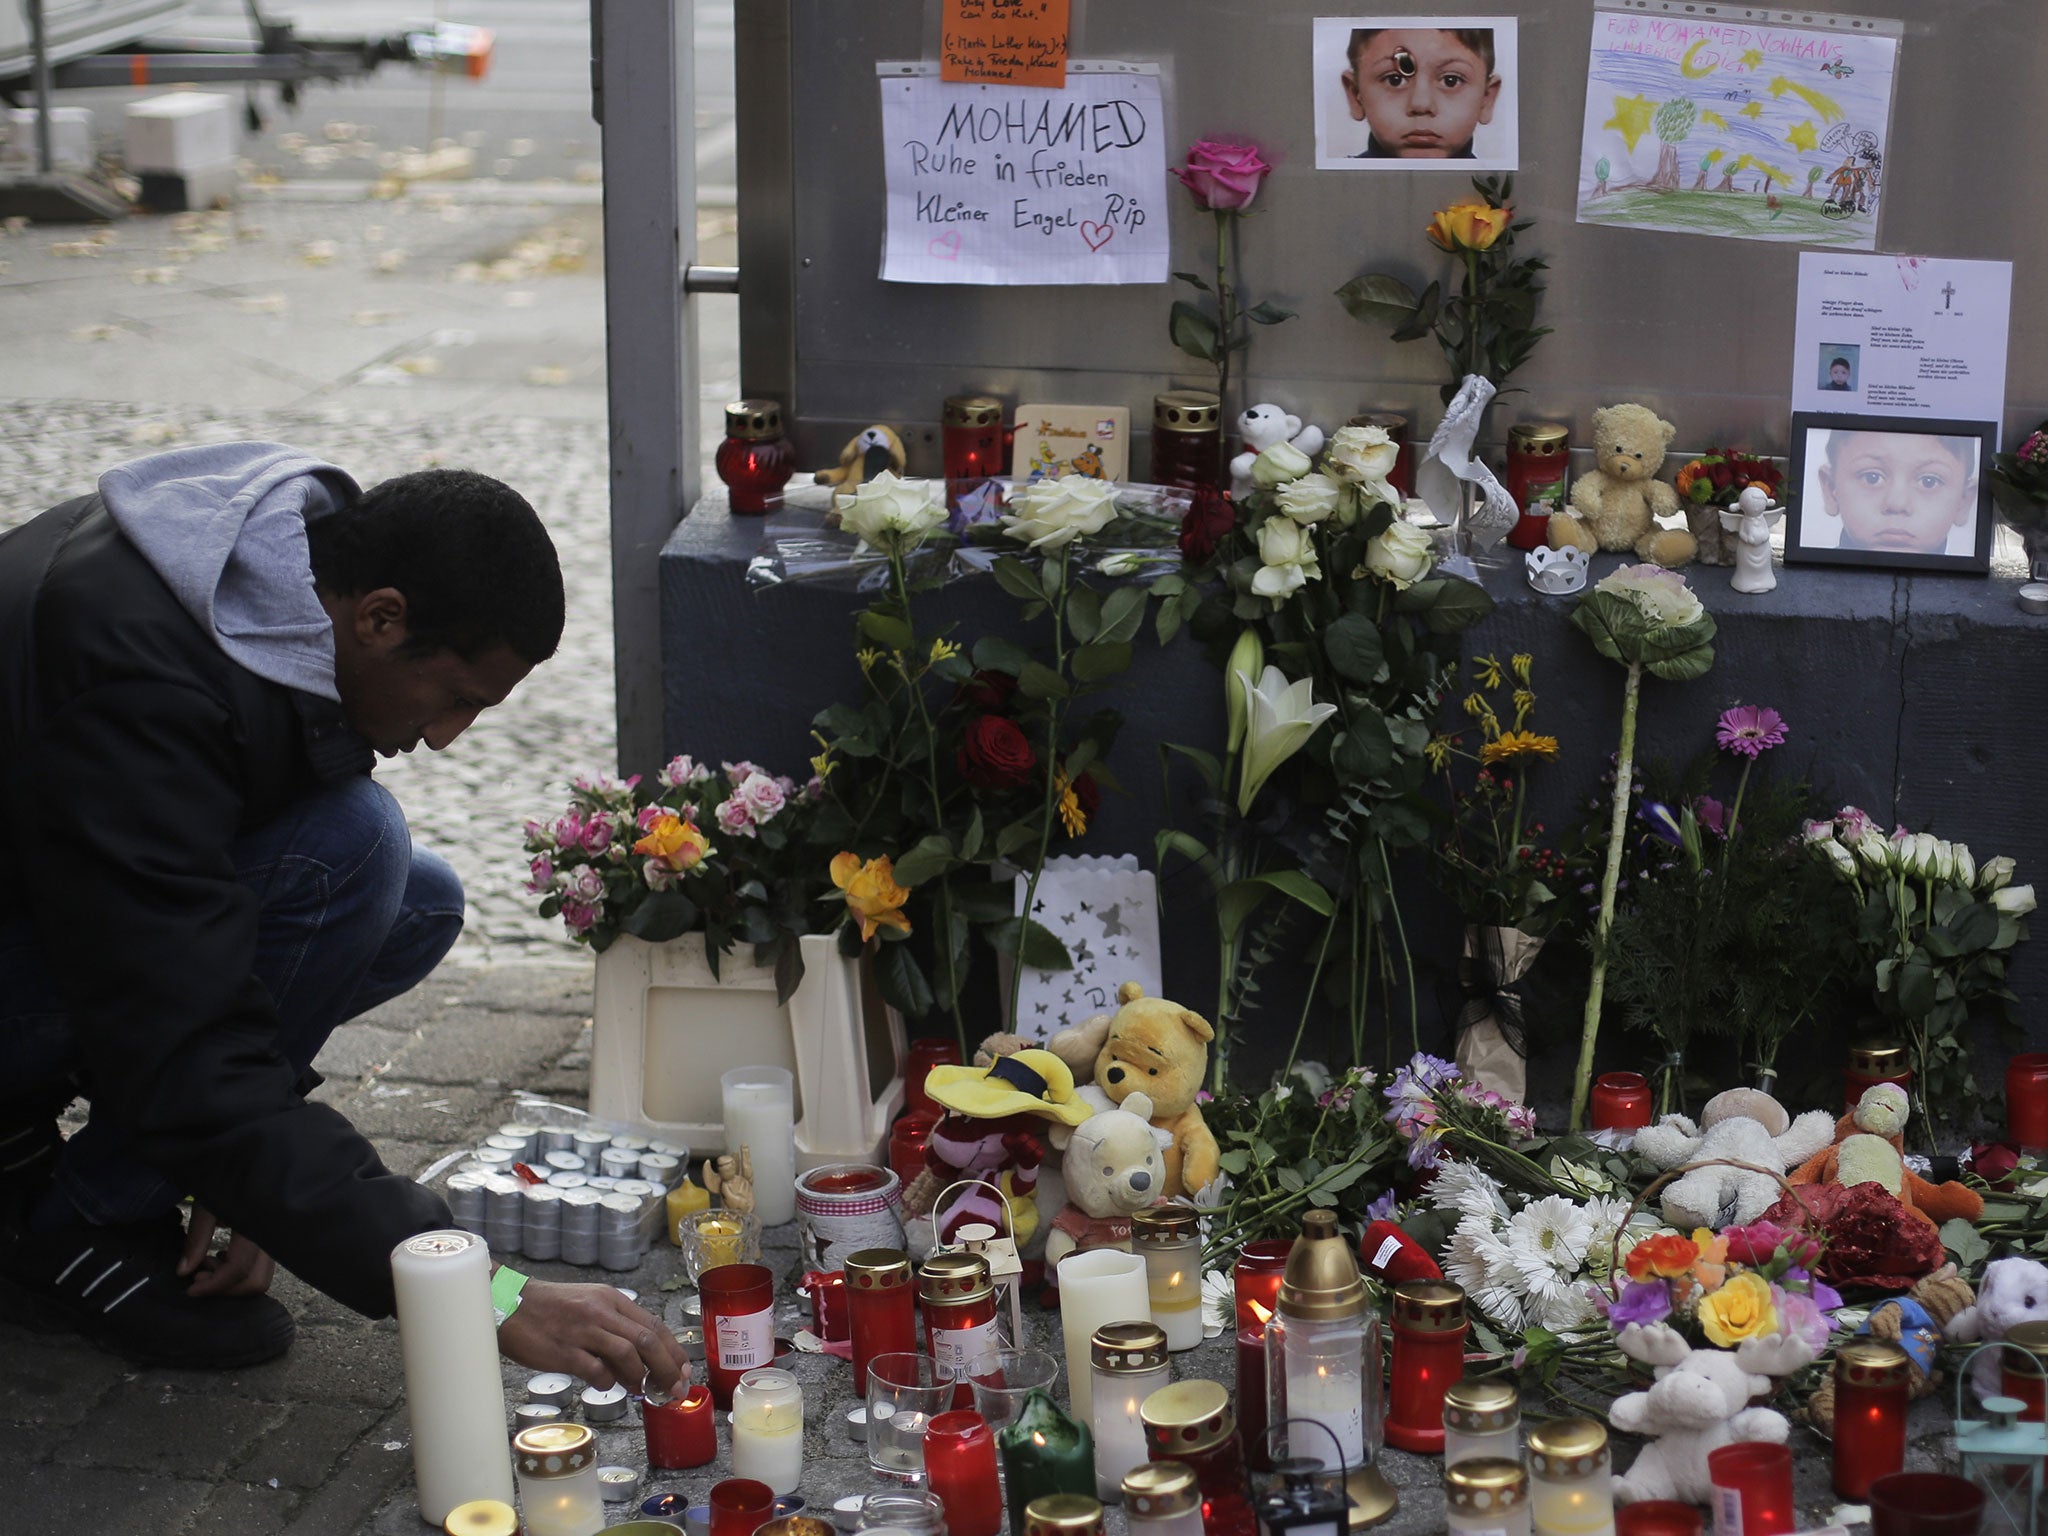 A man lights a candle at a memorial site for the killed 4-year-old Bosnian migrant boy Mohamed Januzi at the State Office of Health and Welfare (Lageso) in Berlin, Germany, on 30 October